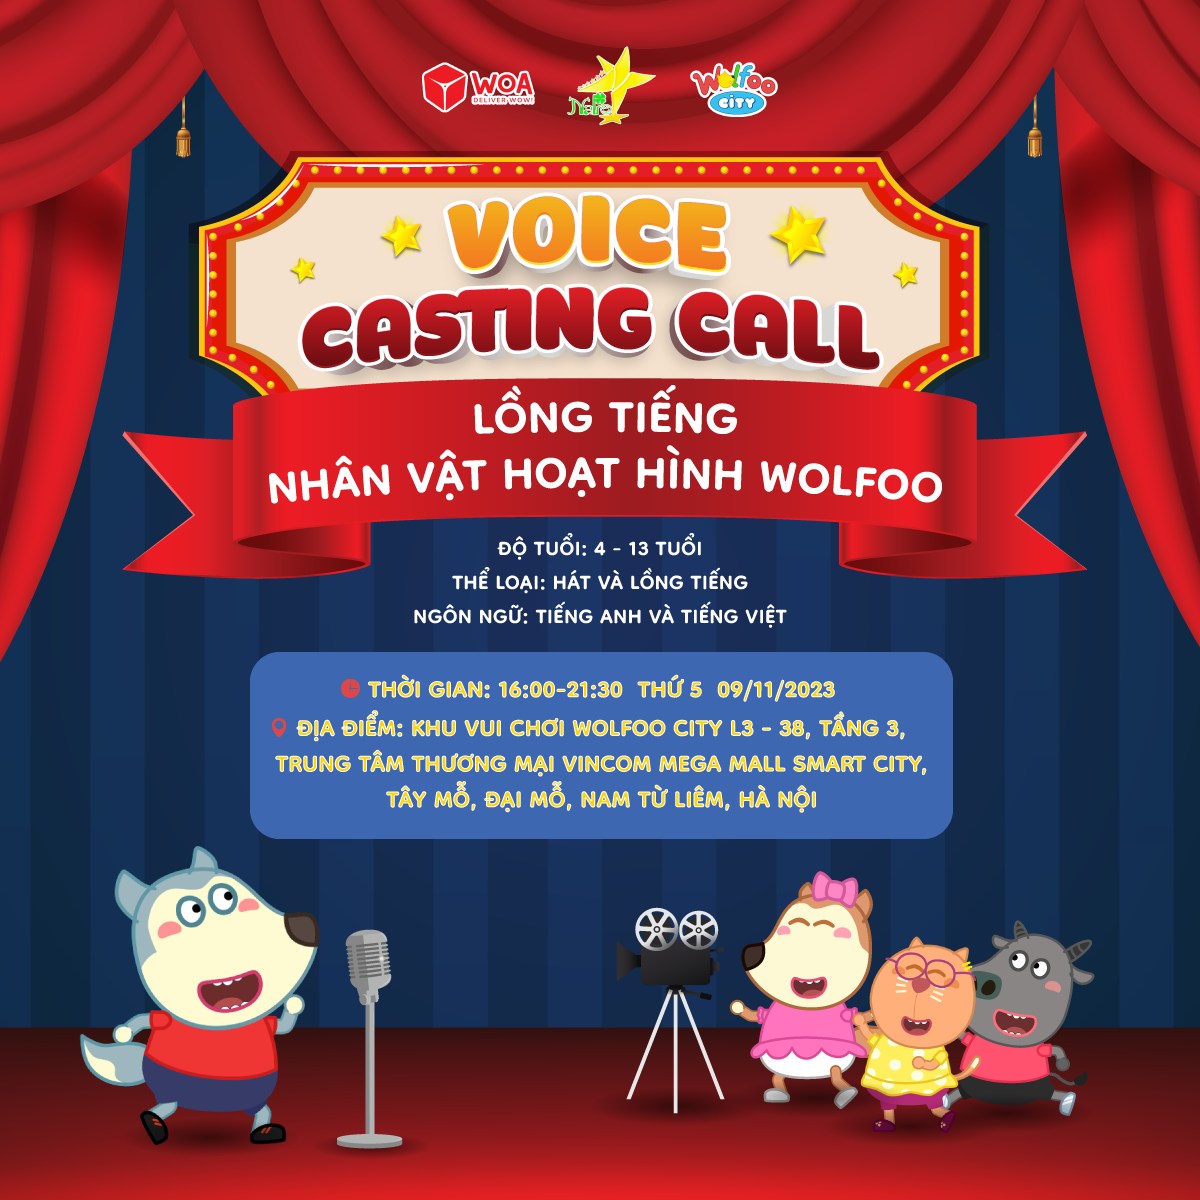 Wolfoo City_Voice casting call